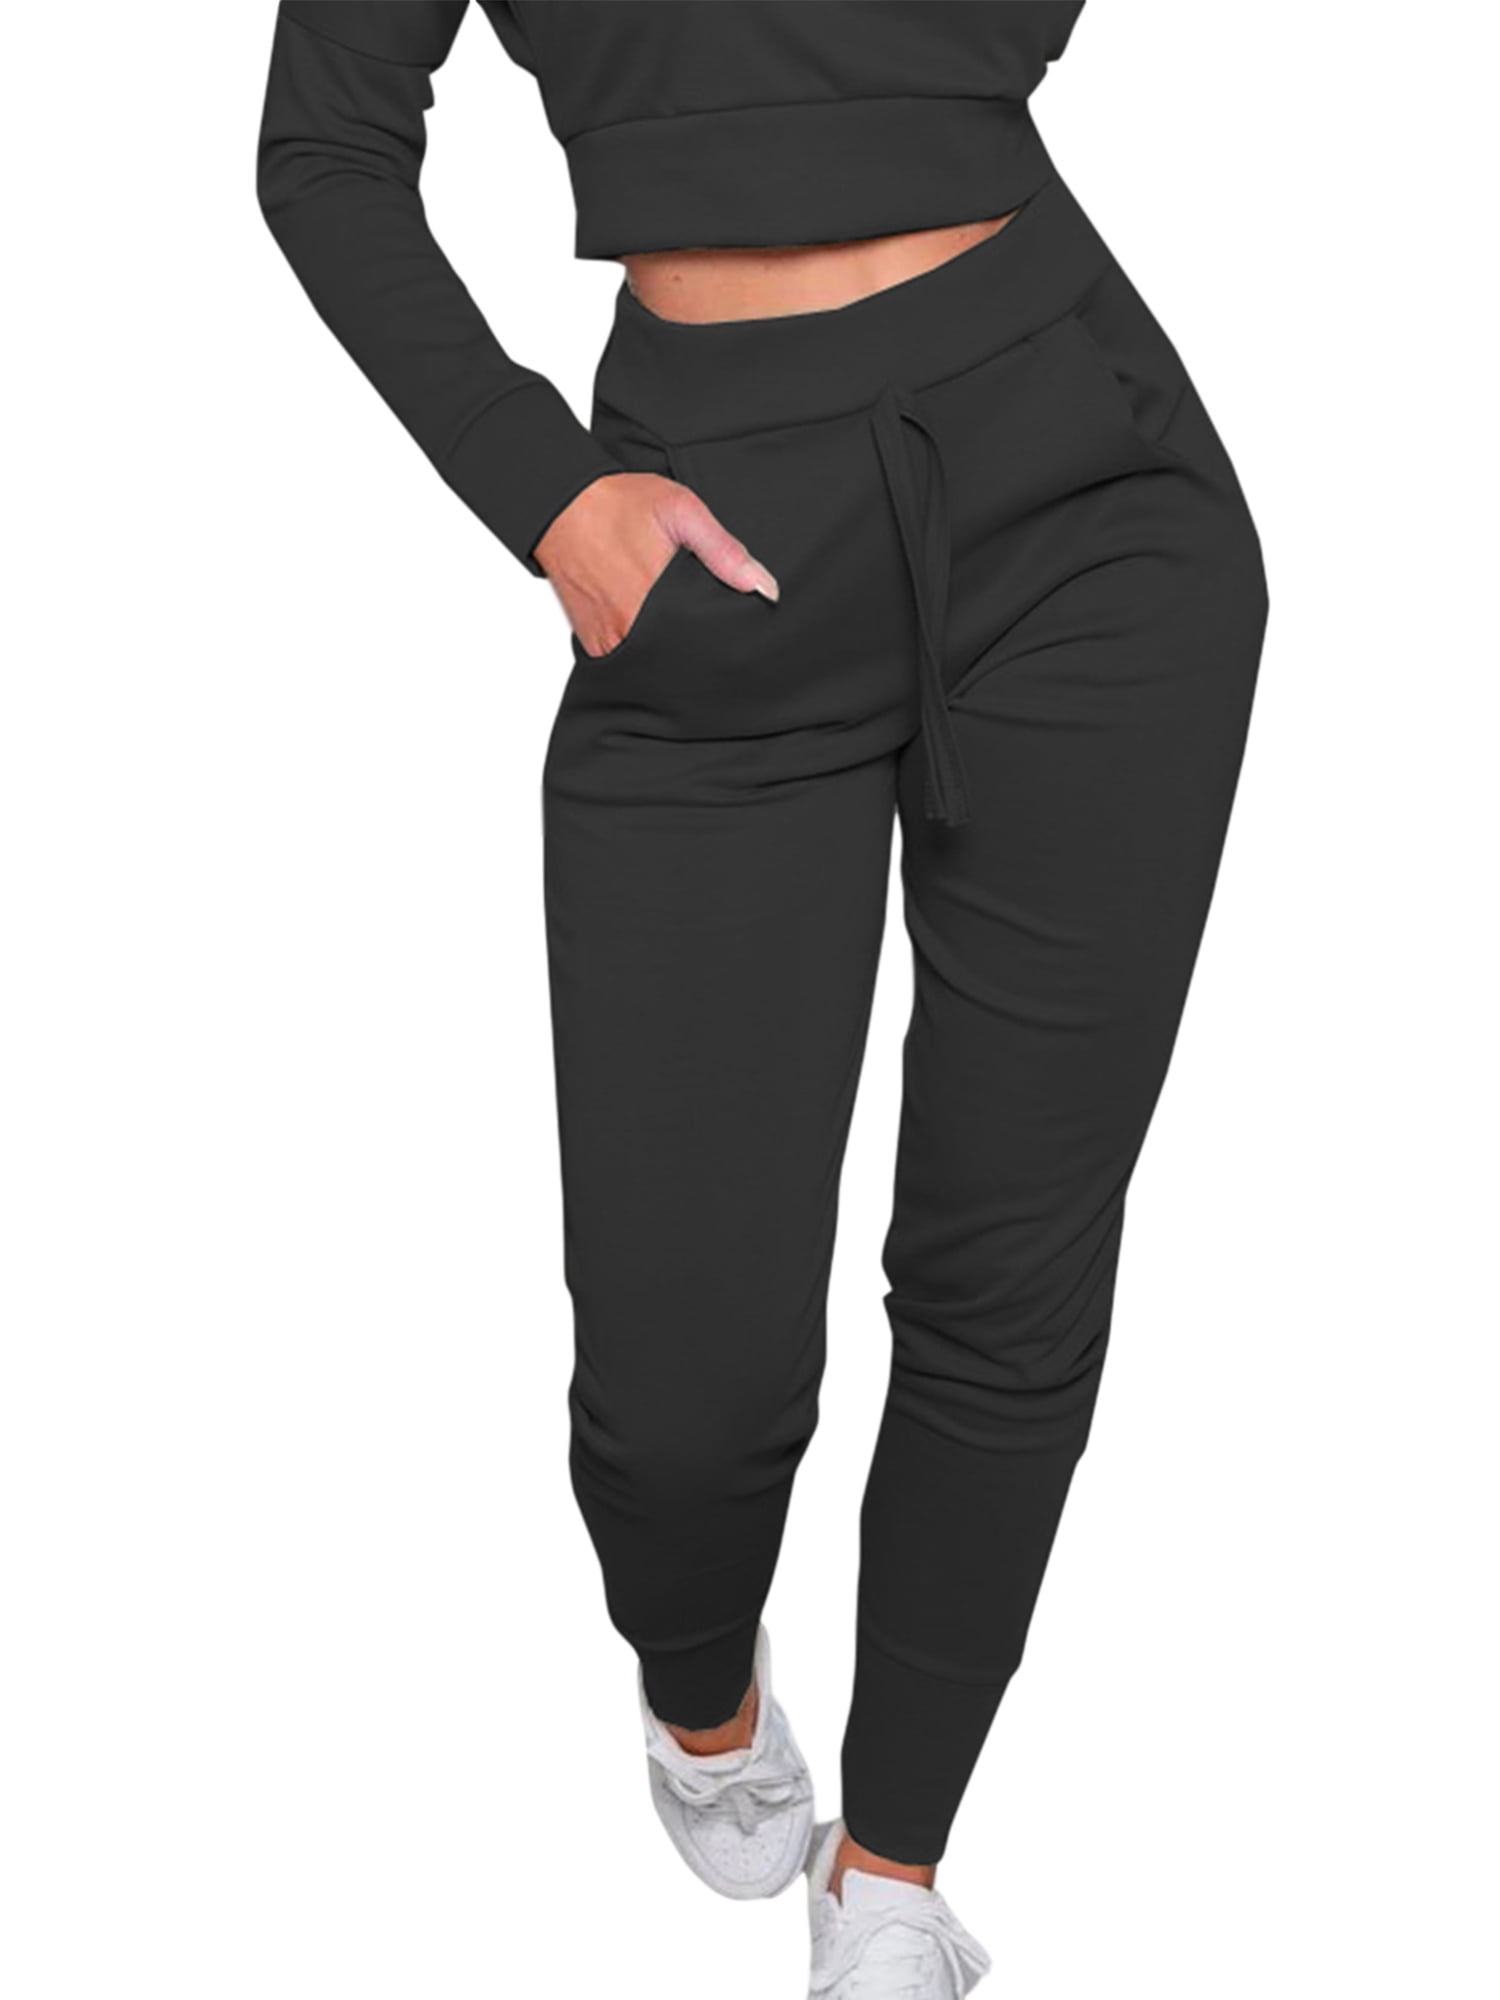 MERSARIPHY Women Jogger Casual Elastic Waist Ankle Cuff Tight